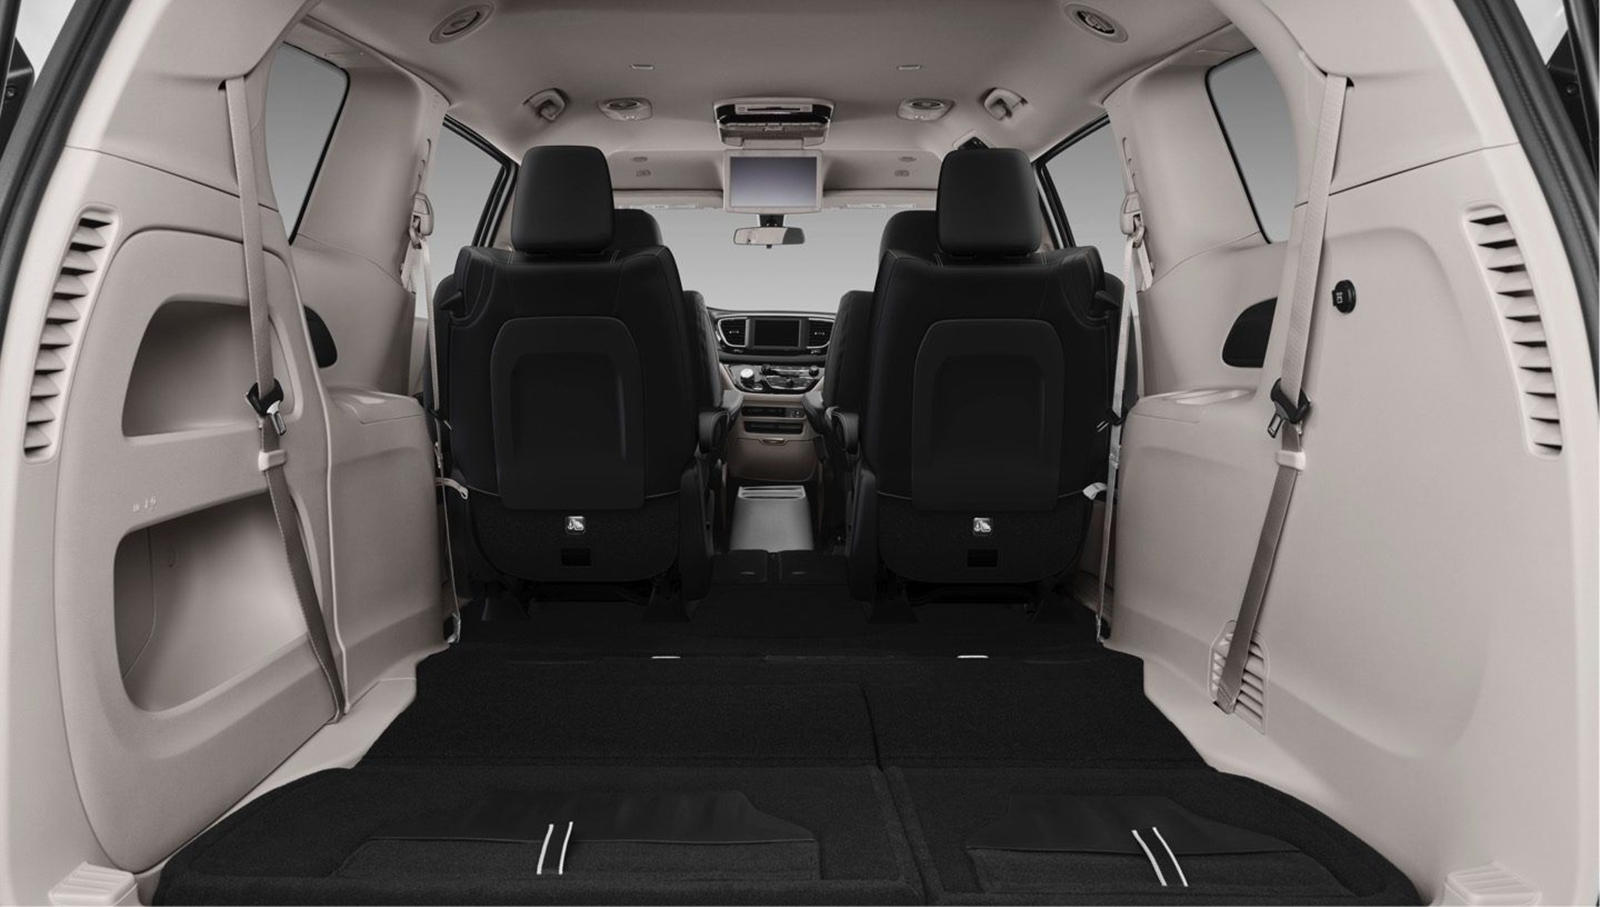 2022 Chrysler Voyager Interior Dimensions: Seating, Cargo Space & Trunk  Size - Photos | CarBuzz